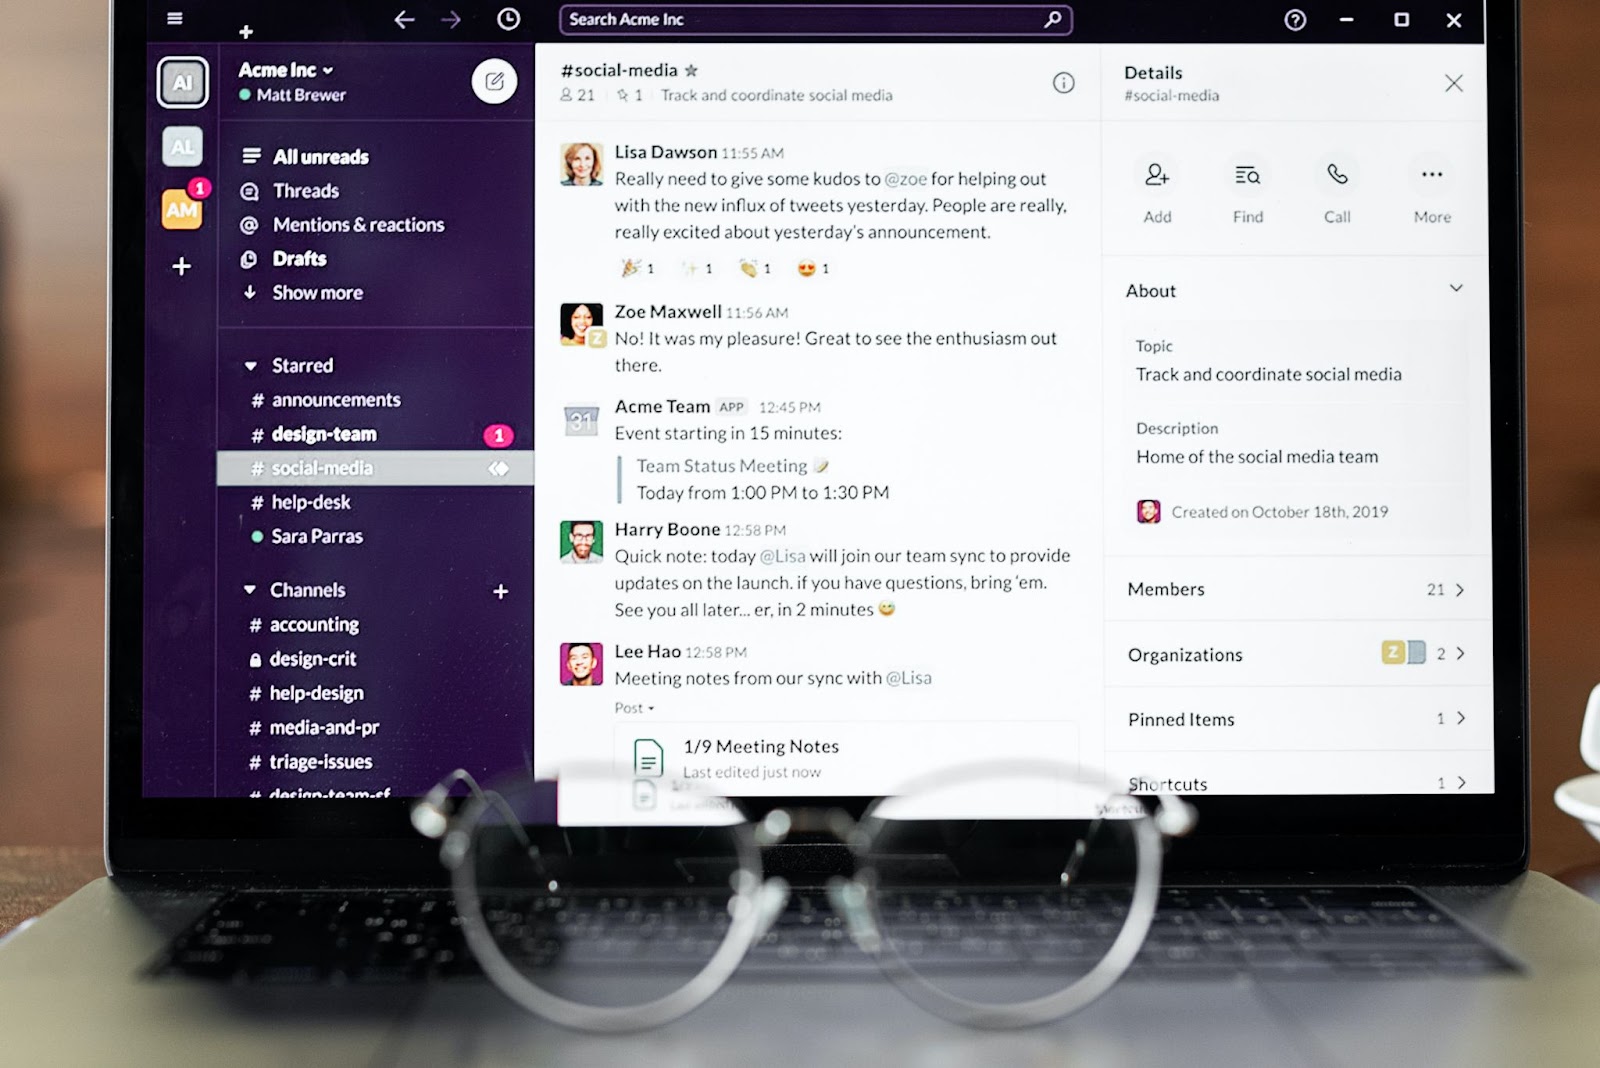 An image of a generic Slack screen on a laptop, showing channels on the left and Slack's messaging layout.